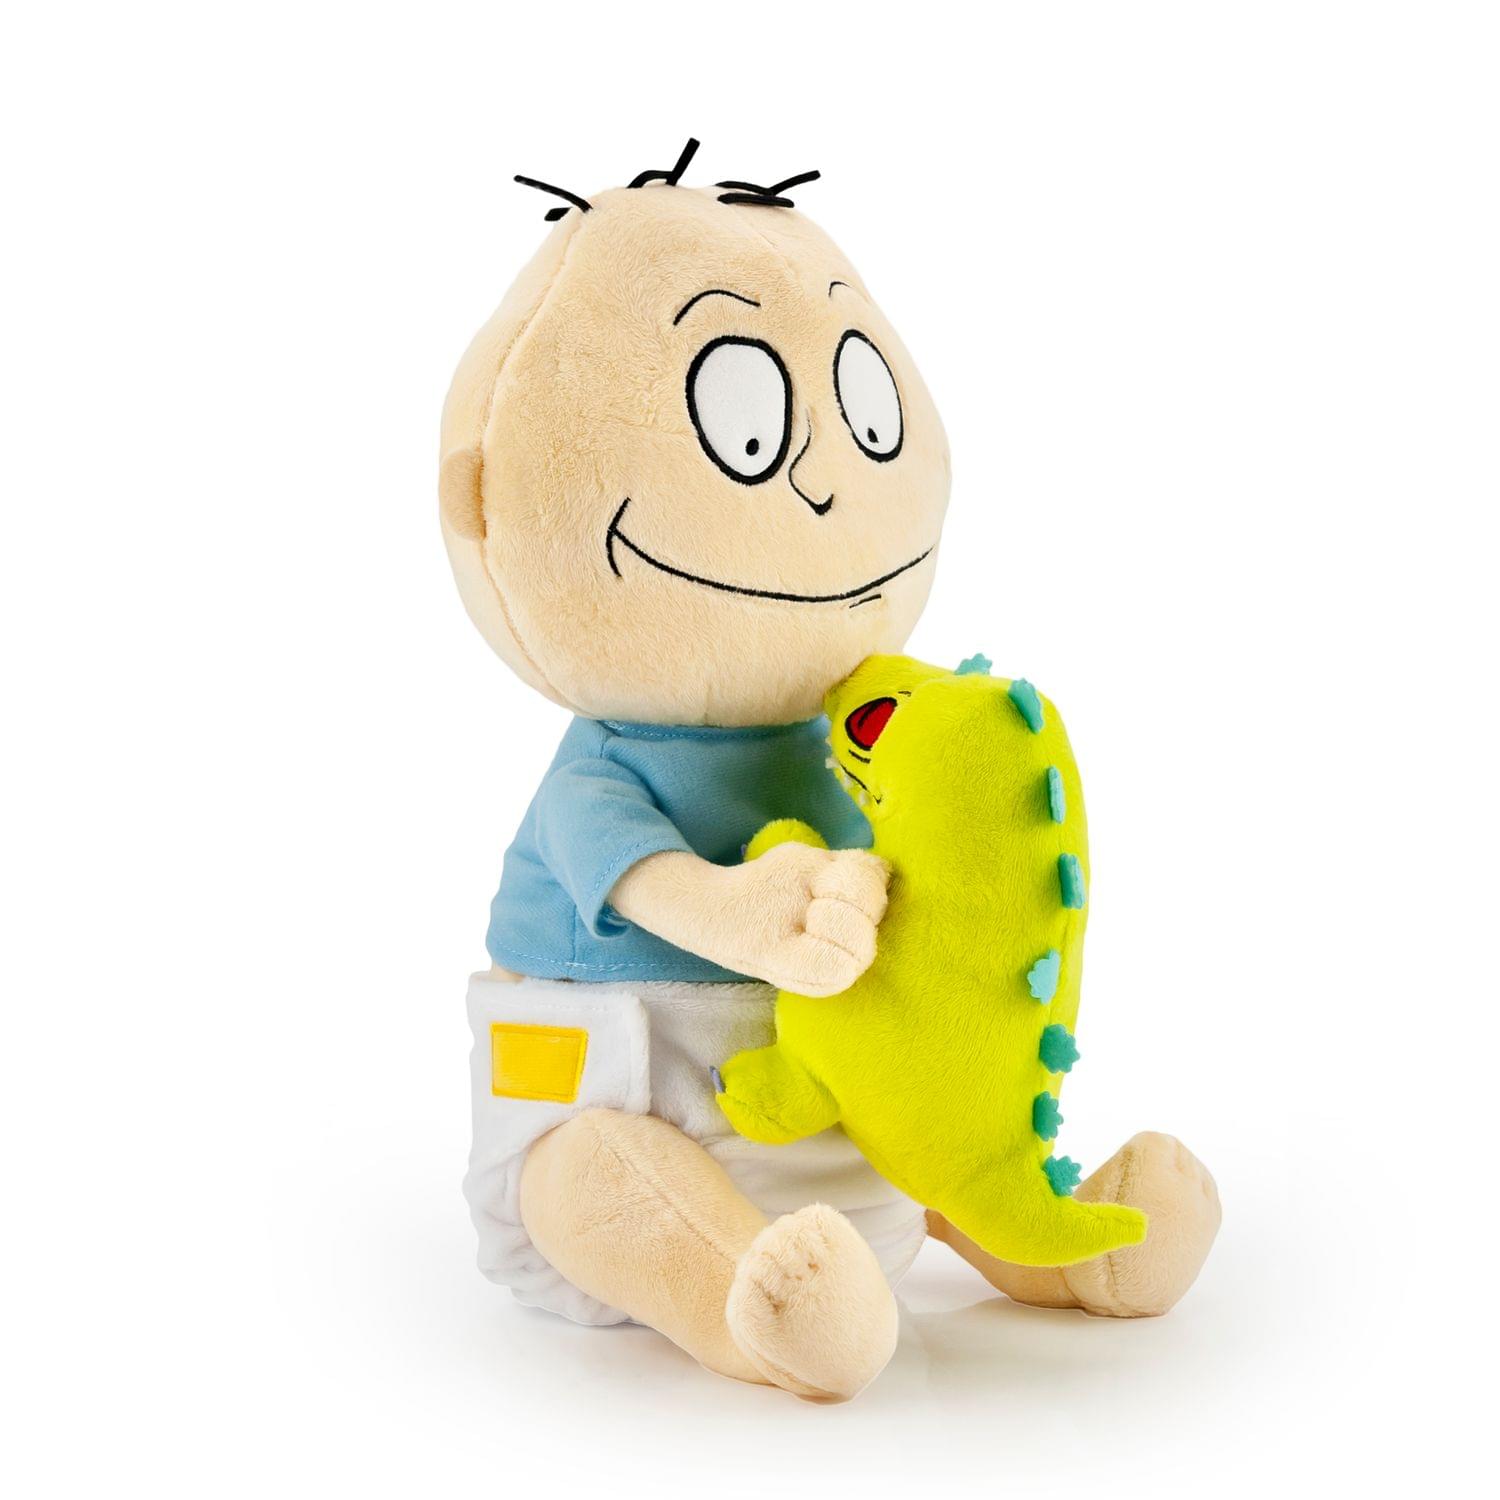 Nickelodeon Rugrats Tommy Pickles and Reptar Stuffed Plush Toy, 12"